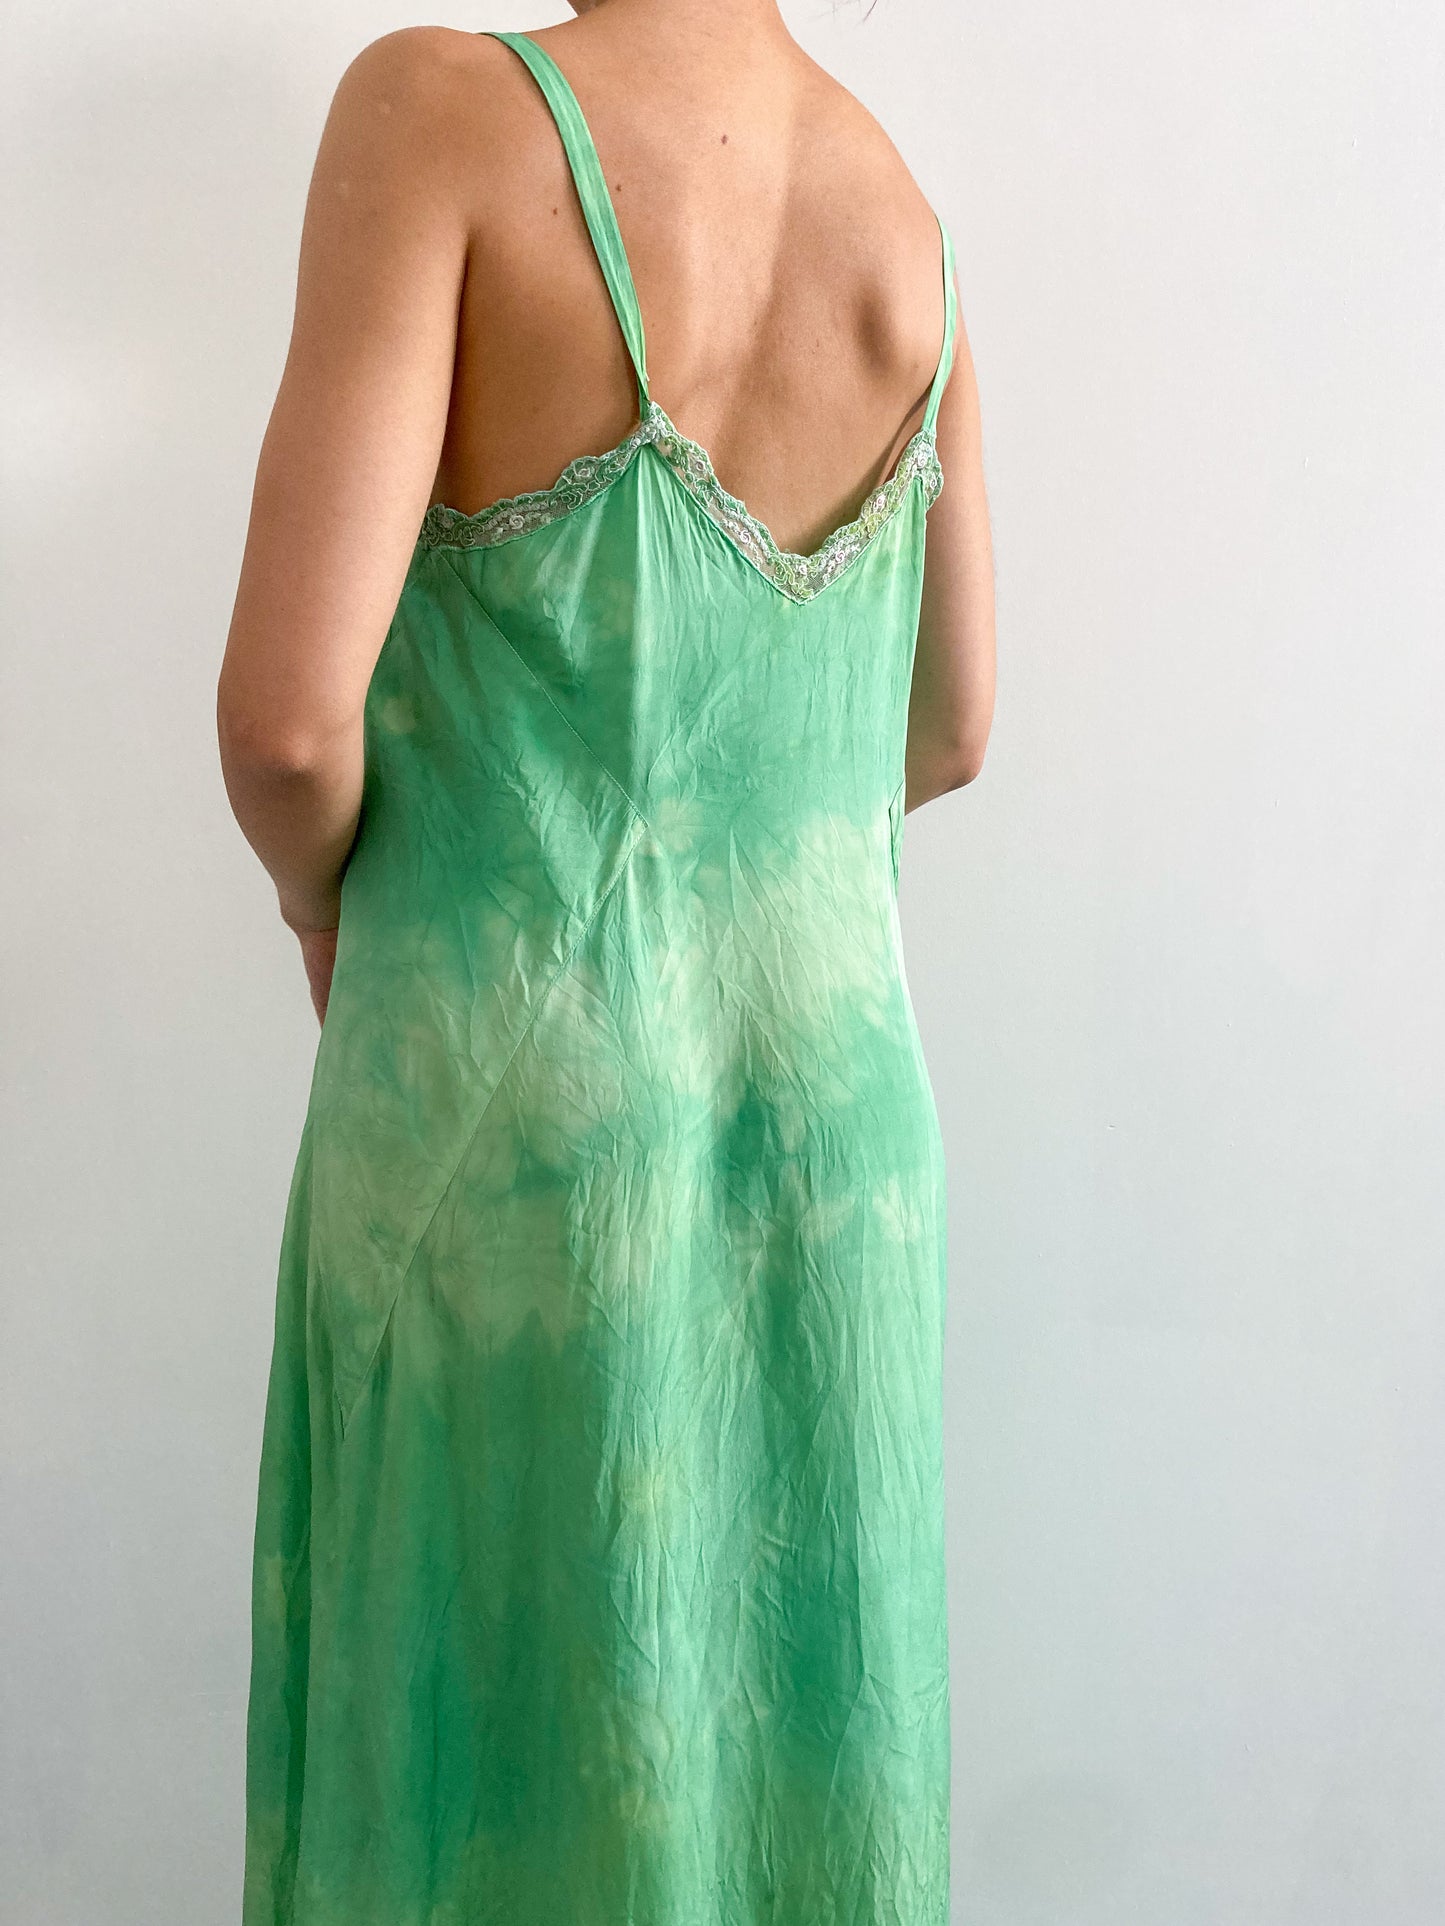 1930s Hand Dyed Maxi Silk Slip with Flower Detail - Emerald